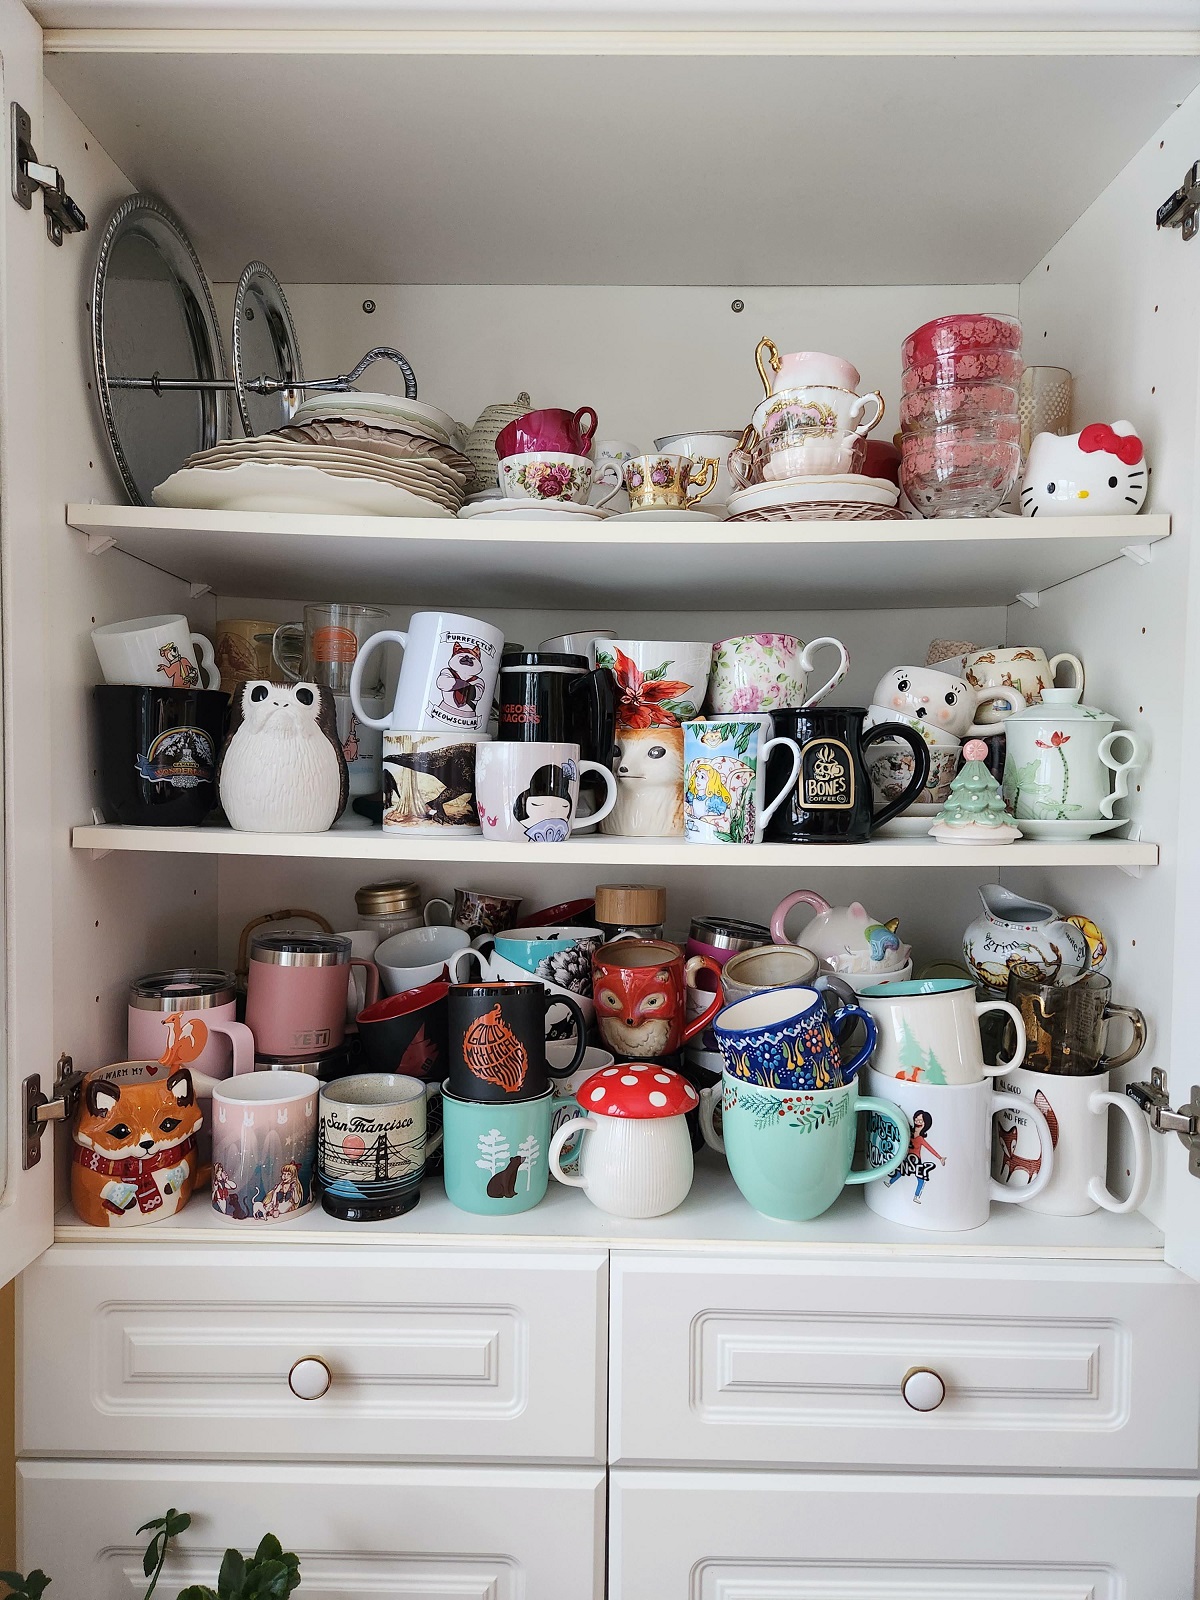 My Collection. I Just Got Rid Of 10 Mugs After Christmas...It Didn't Help